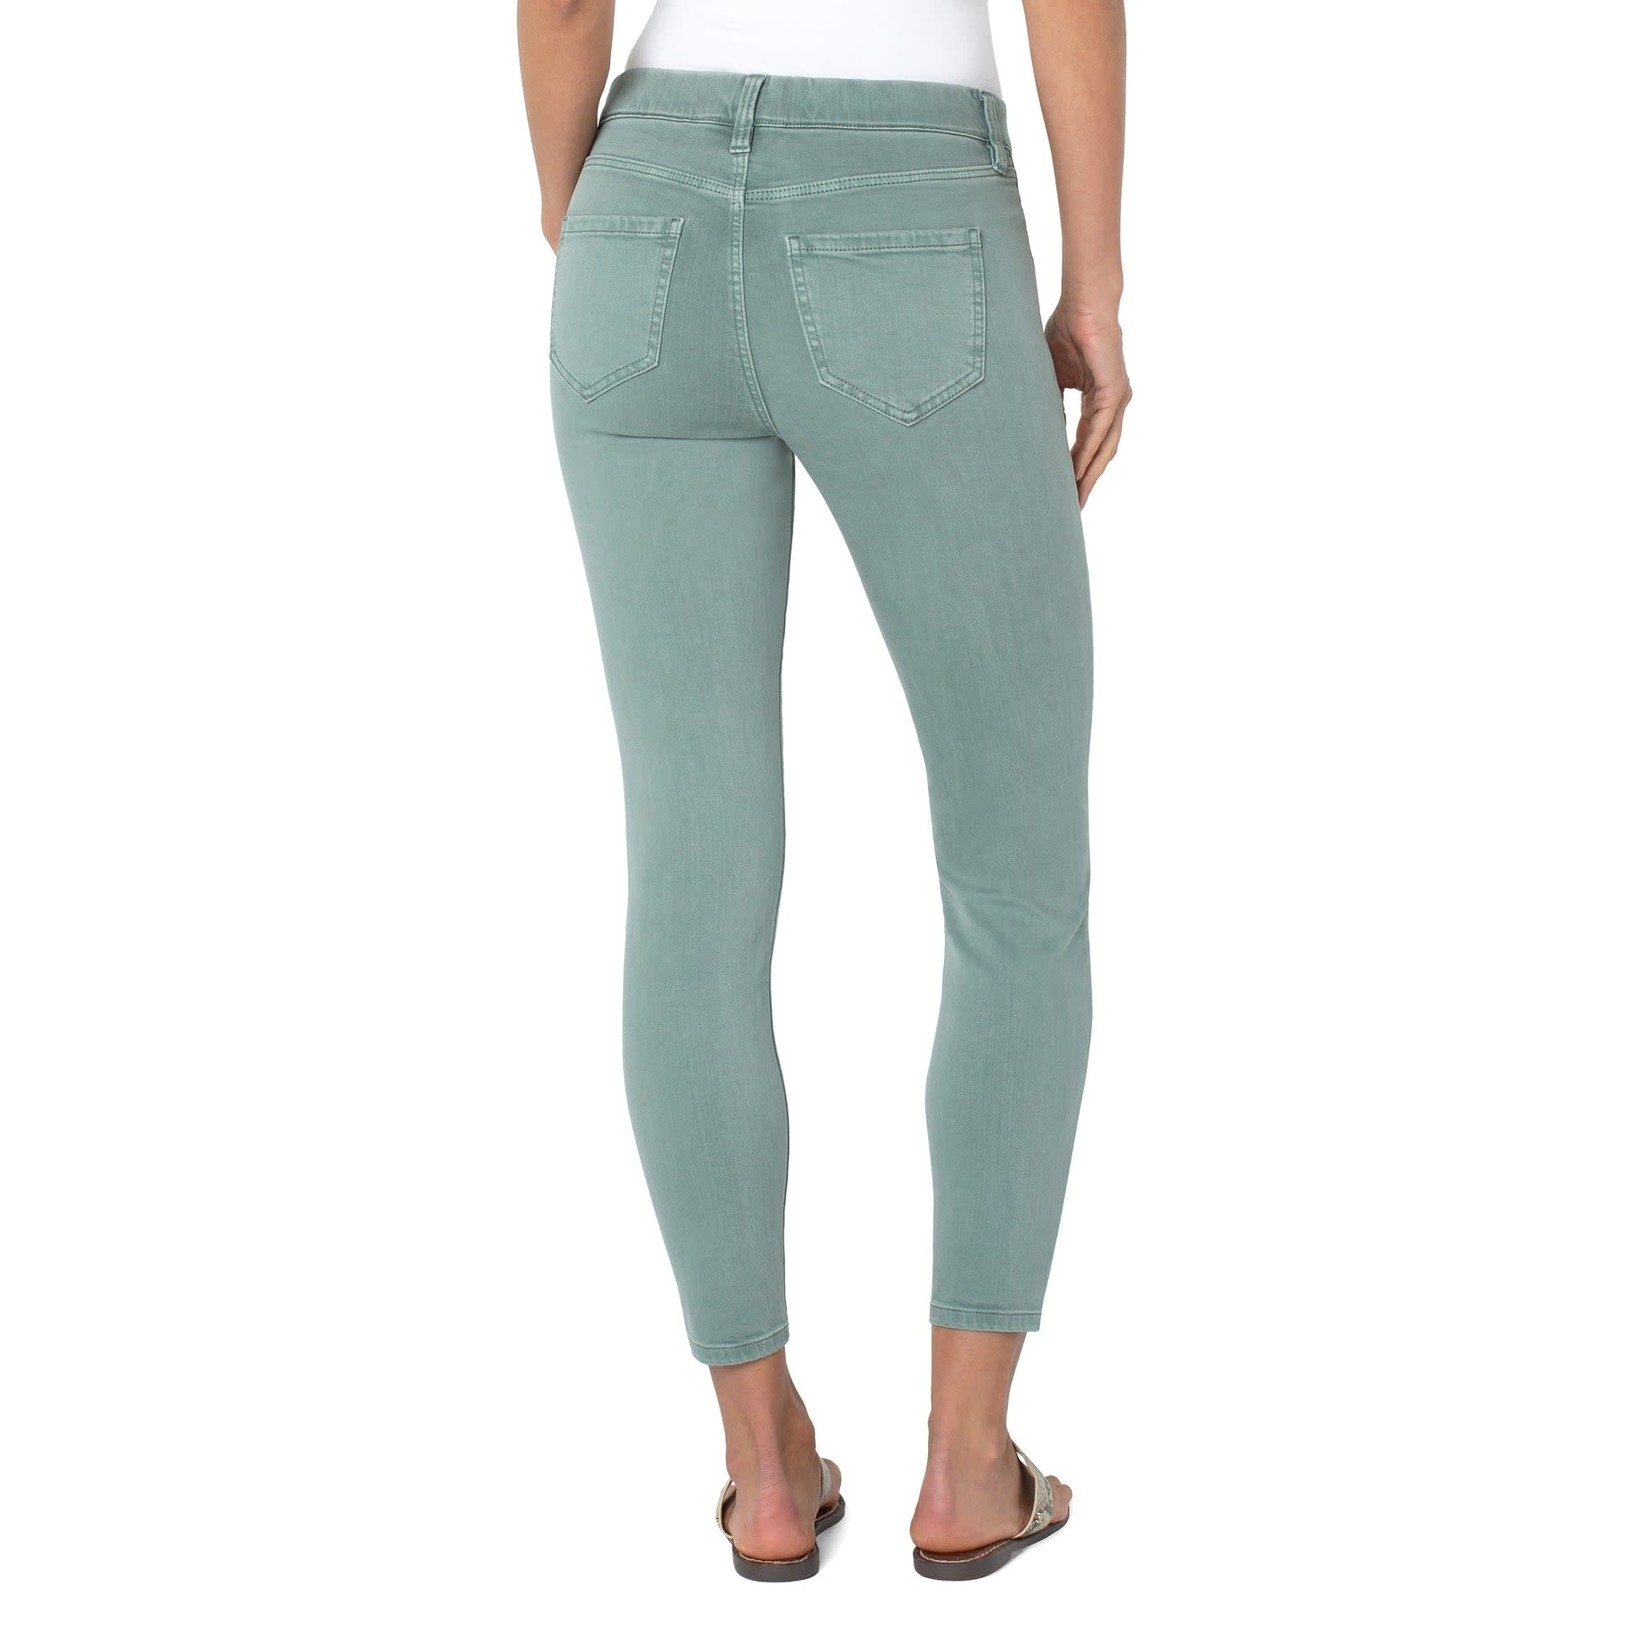 Liverpool Gia Glider Ankle Skinny 28” Jean in Sage Green